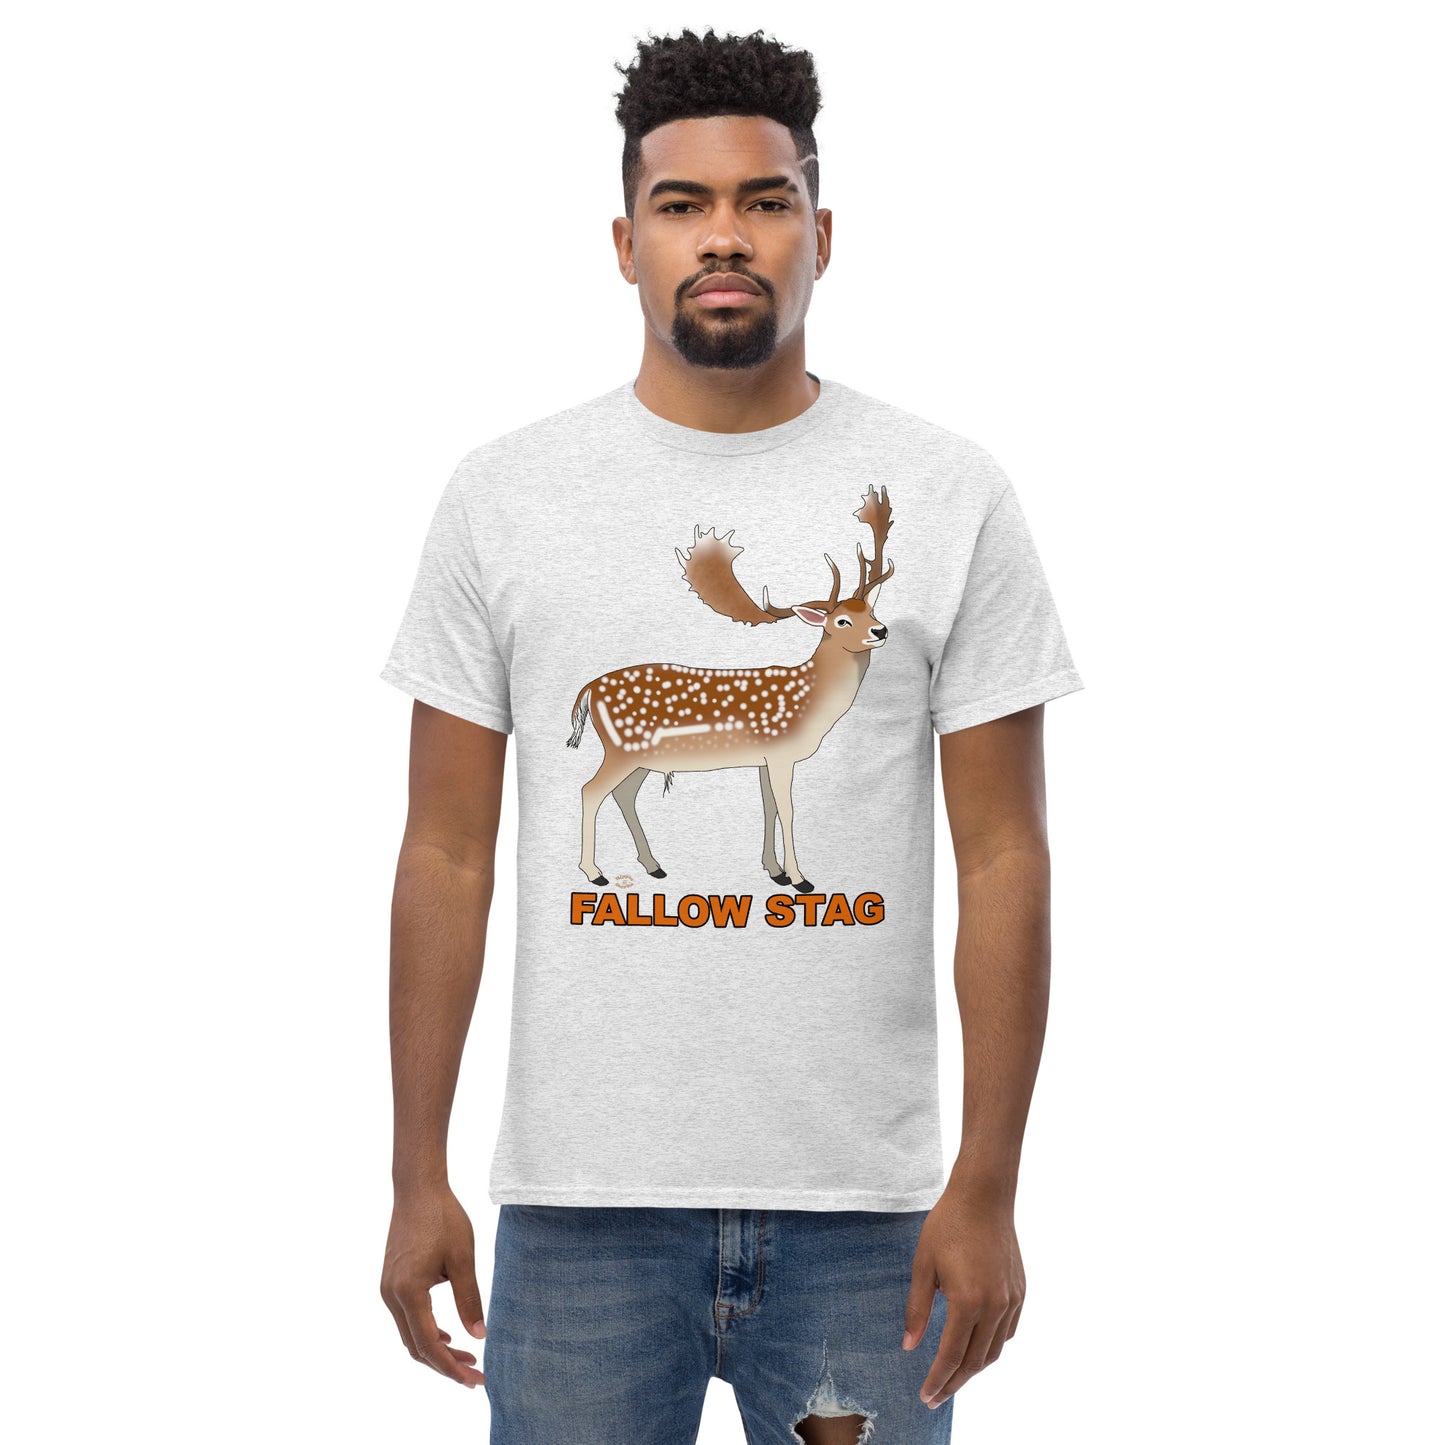 "Fallow Stag" Men's Classic Tee